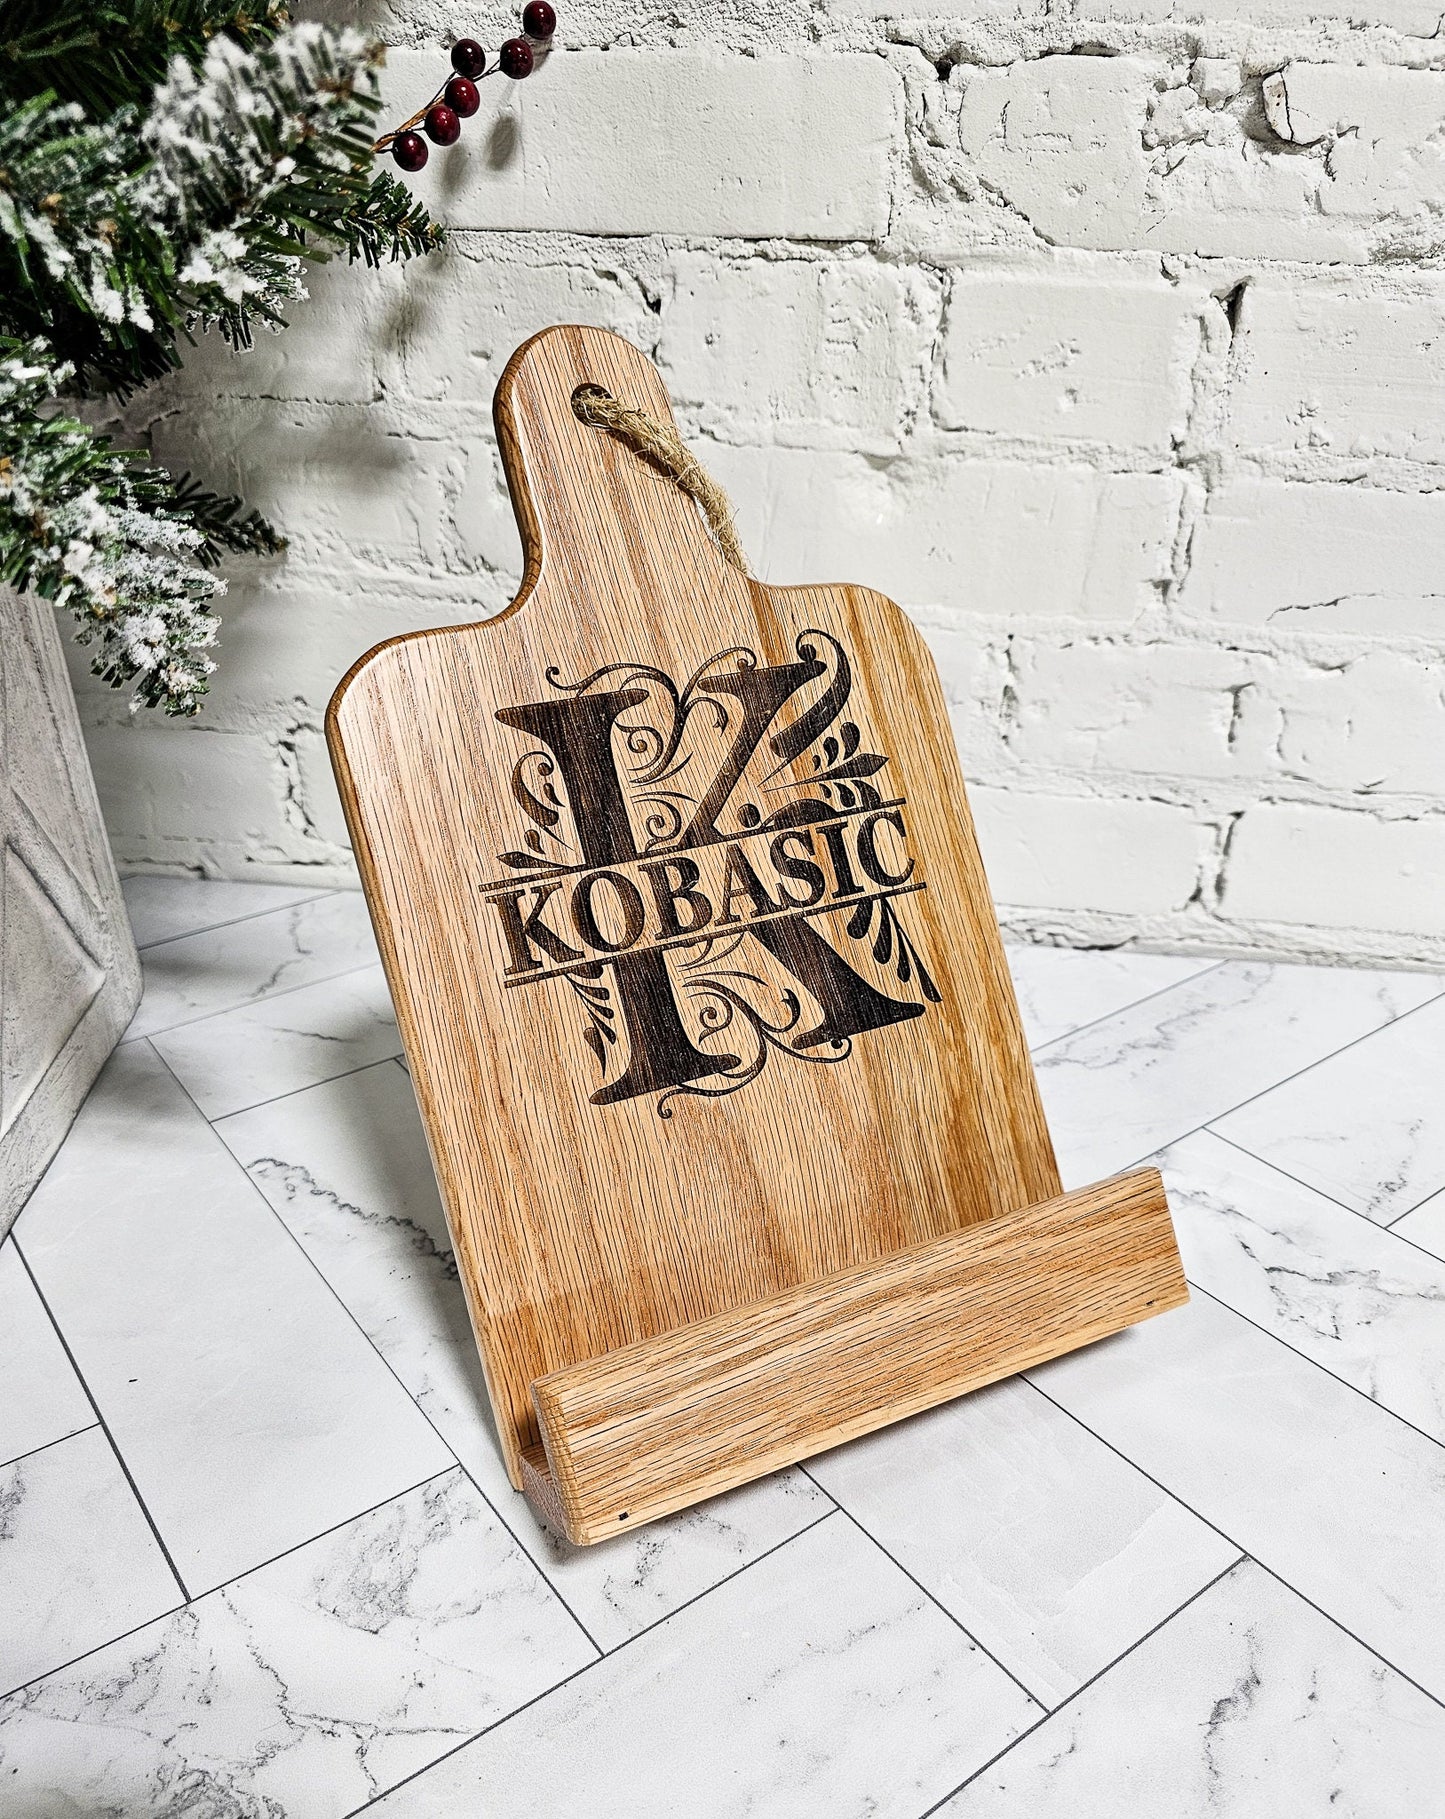 Personalized Cookbook Stand - Adjustable wood cookbook and recipe holder -  Pinecone Home